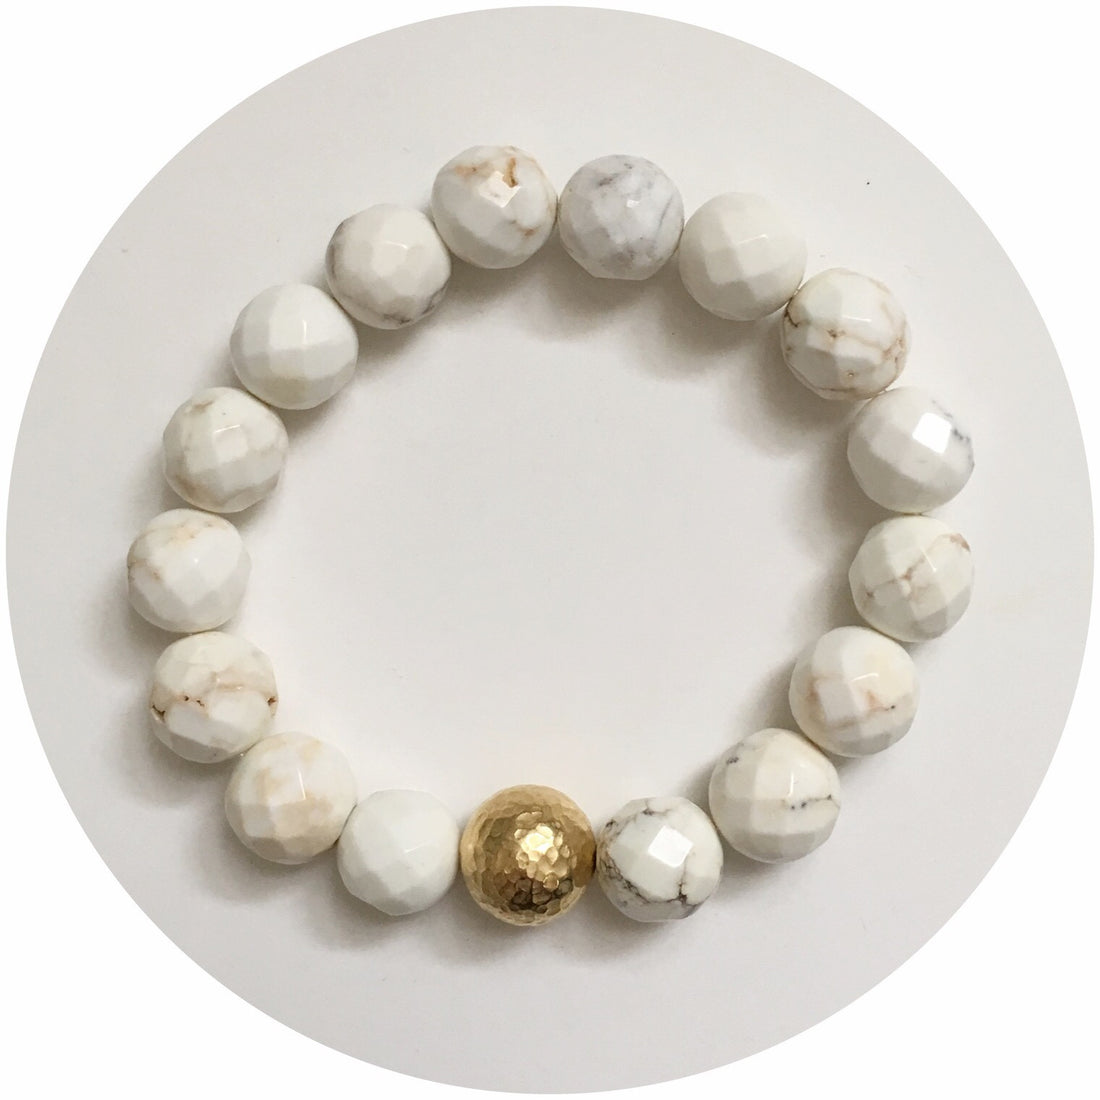 White Magnesite with Hammered Gold Accent - Oriana Lamarca LLC